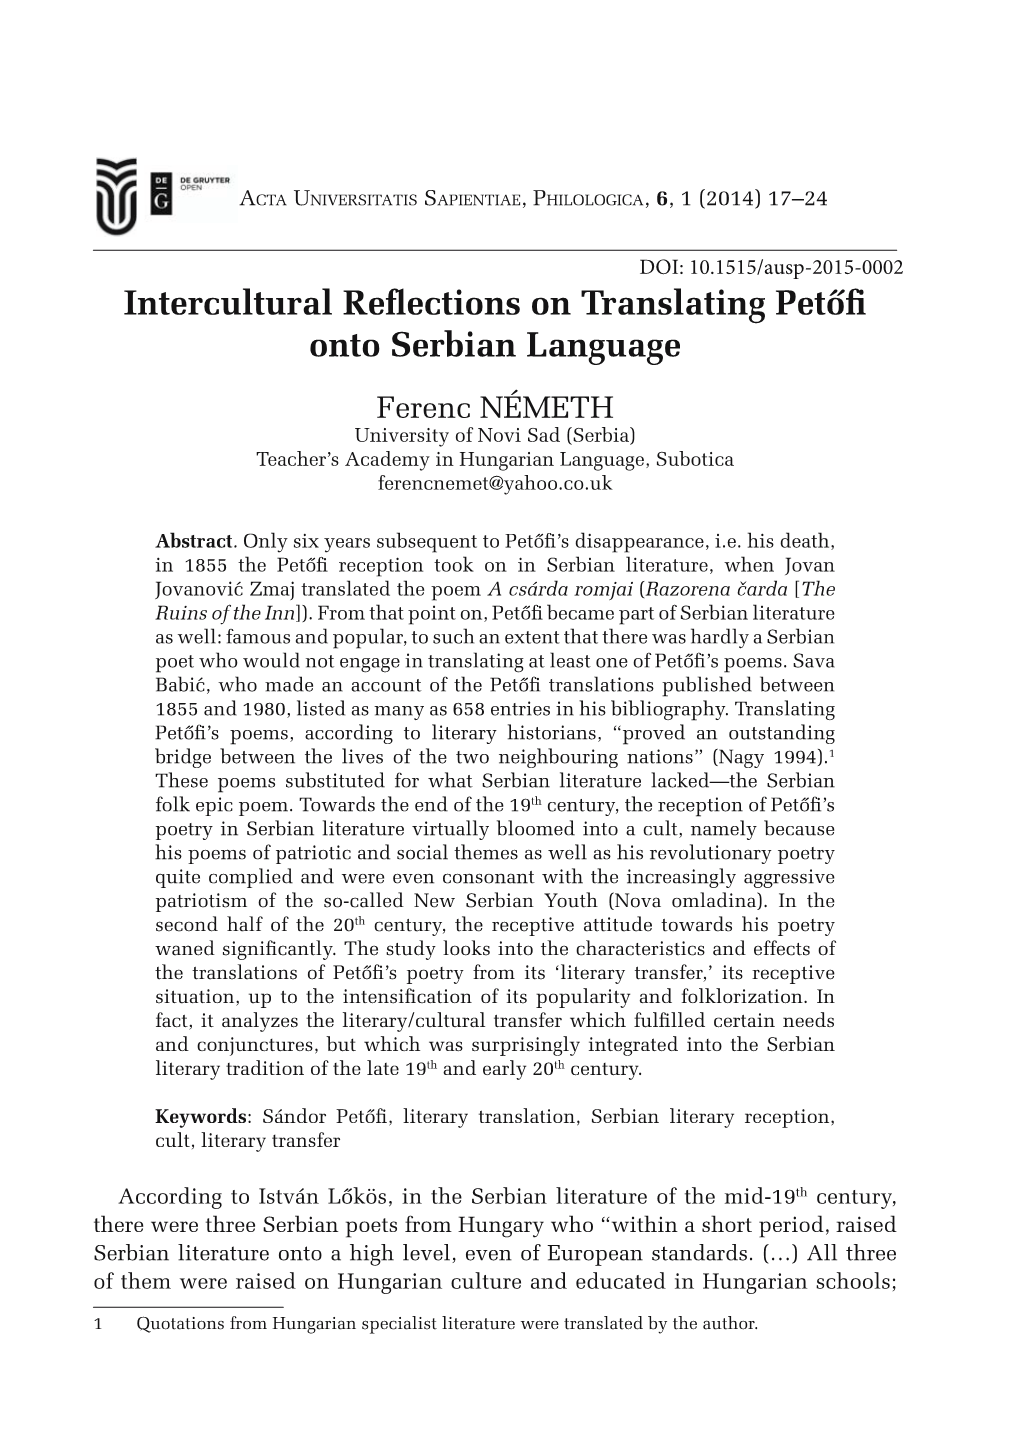 Intercultural Remections on Translating Petől Onto Serbian